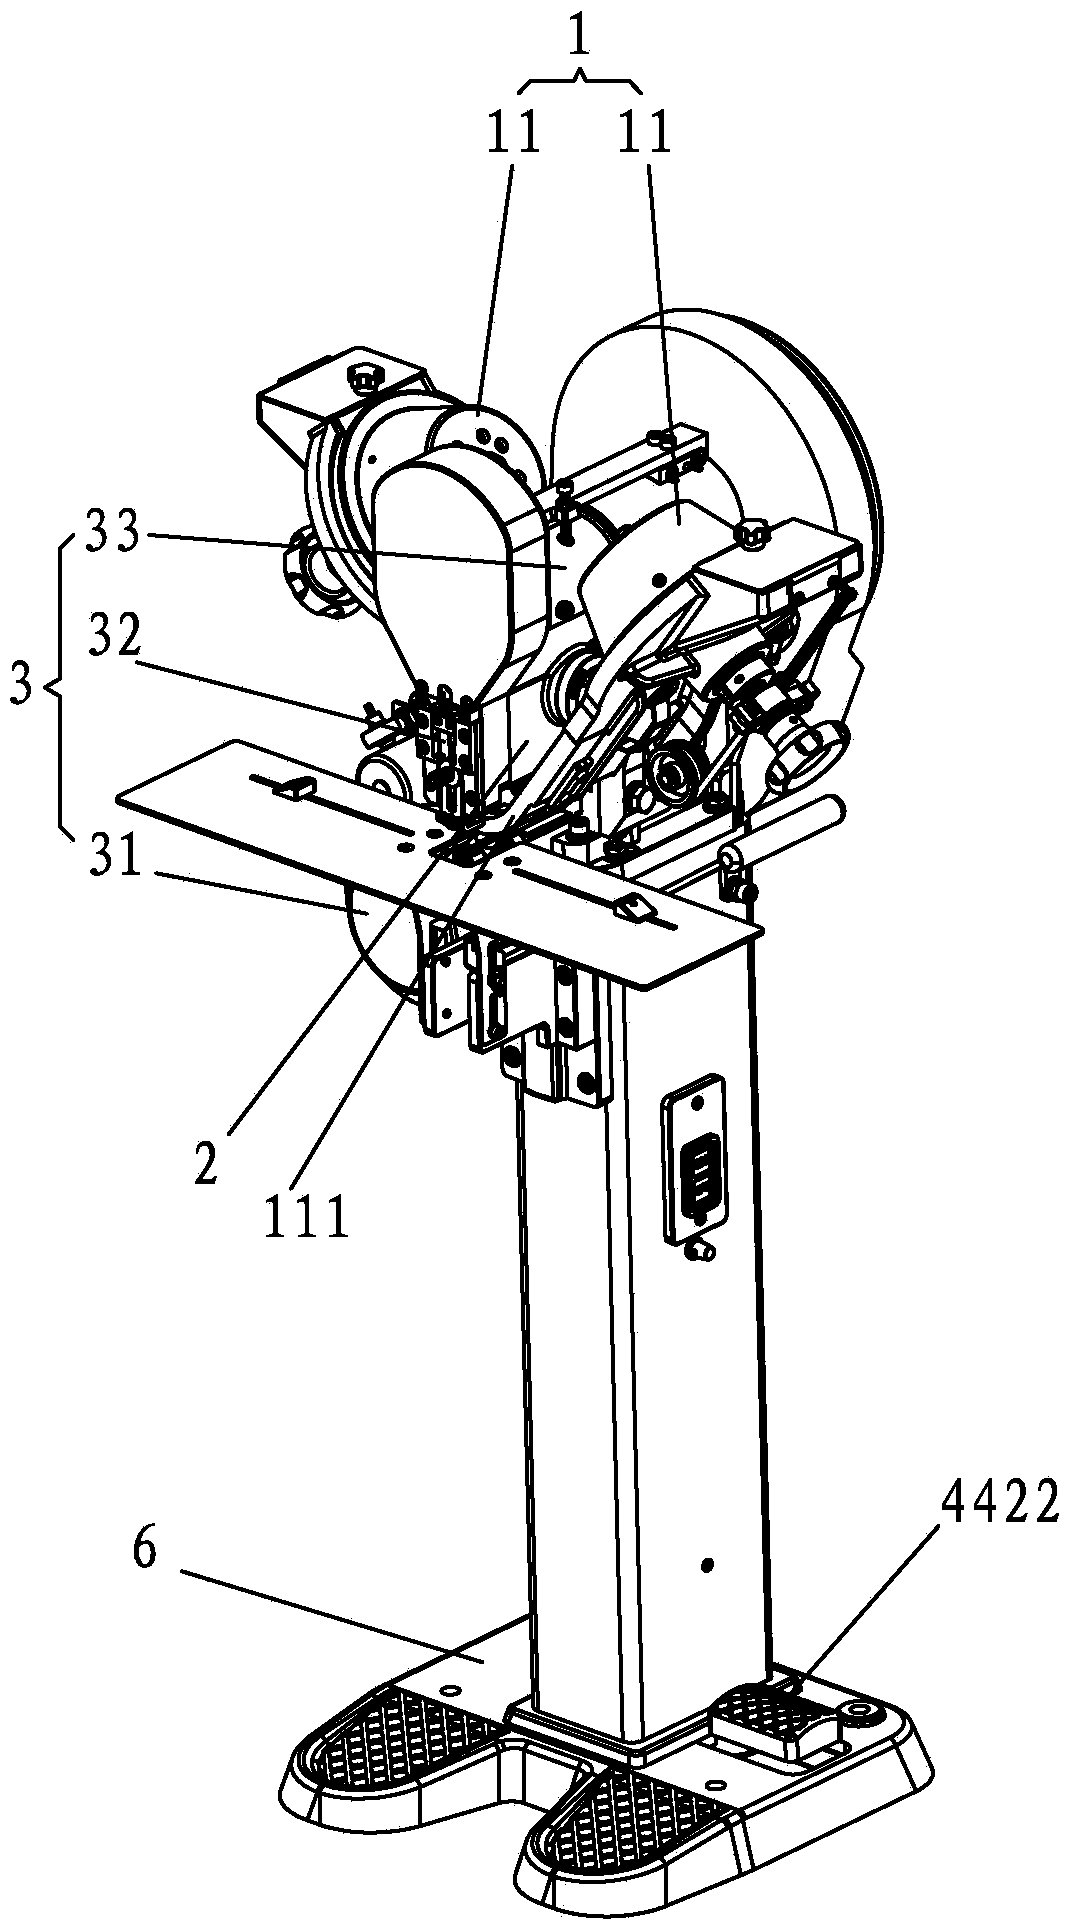 Novel fastener-holing machine with improved material pushing mechanism